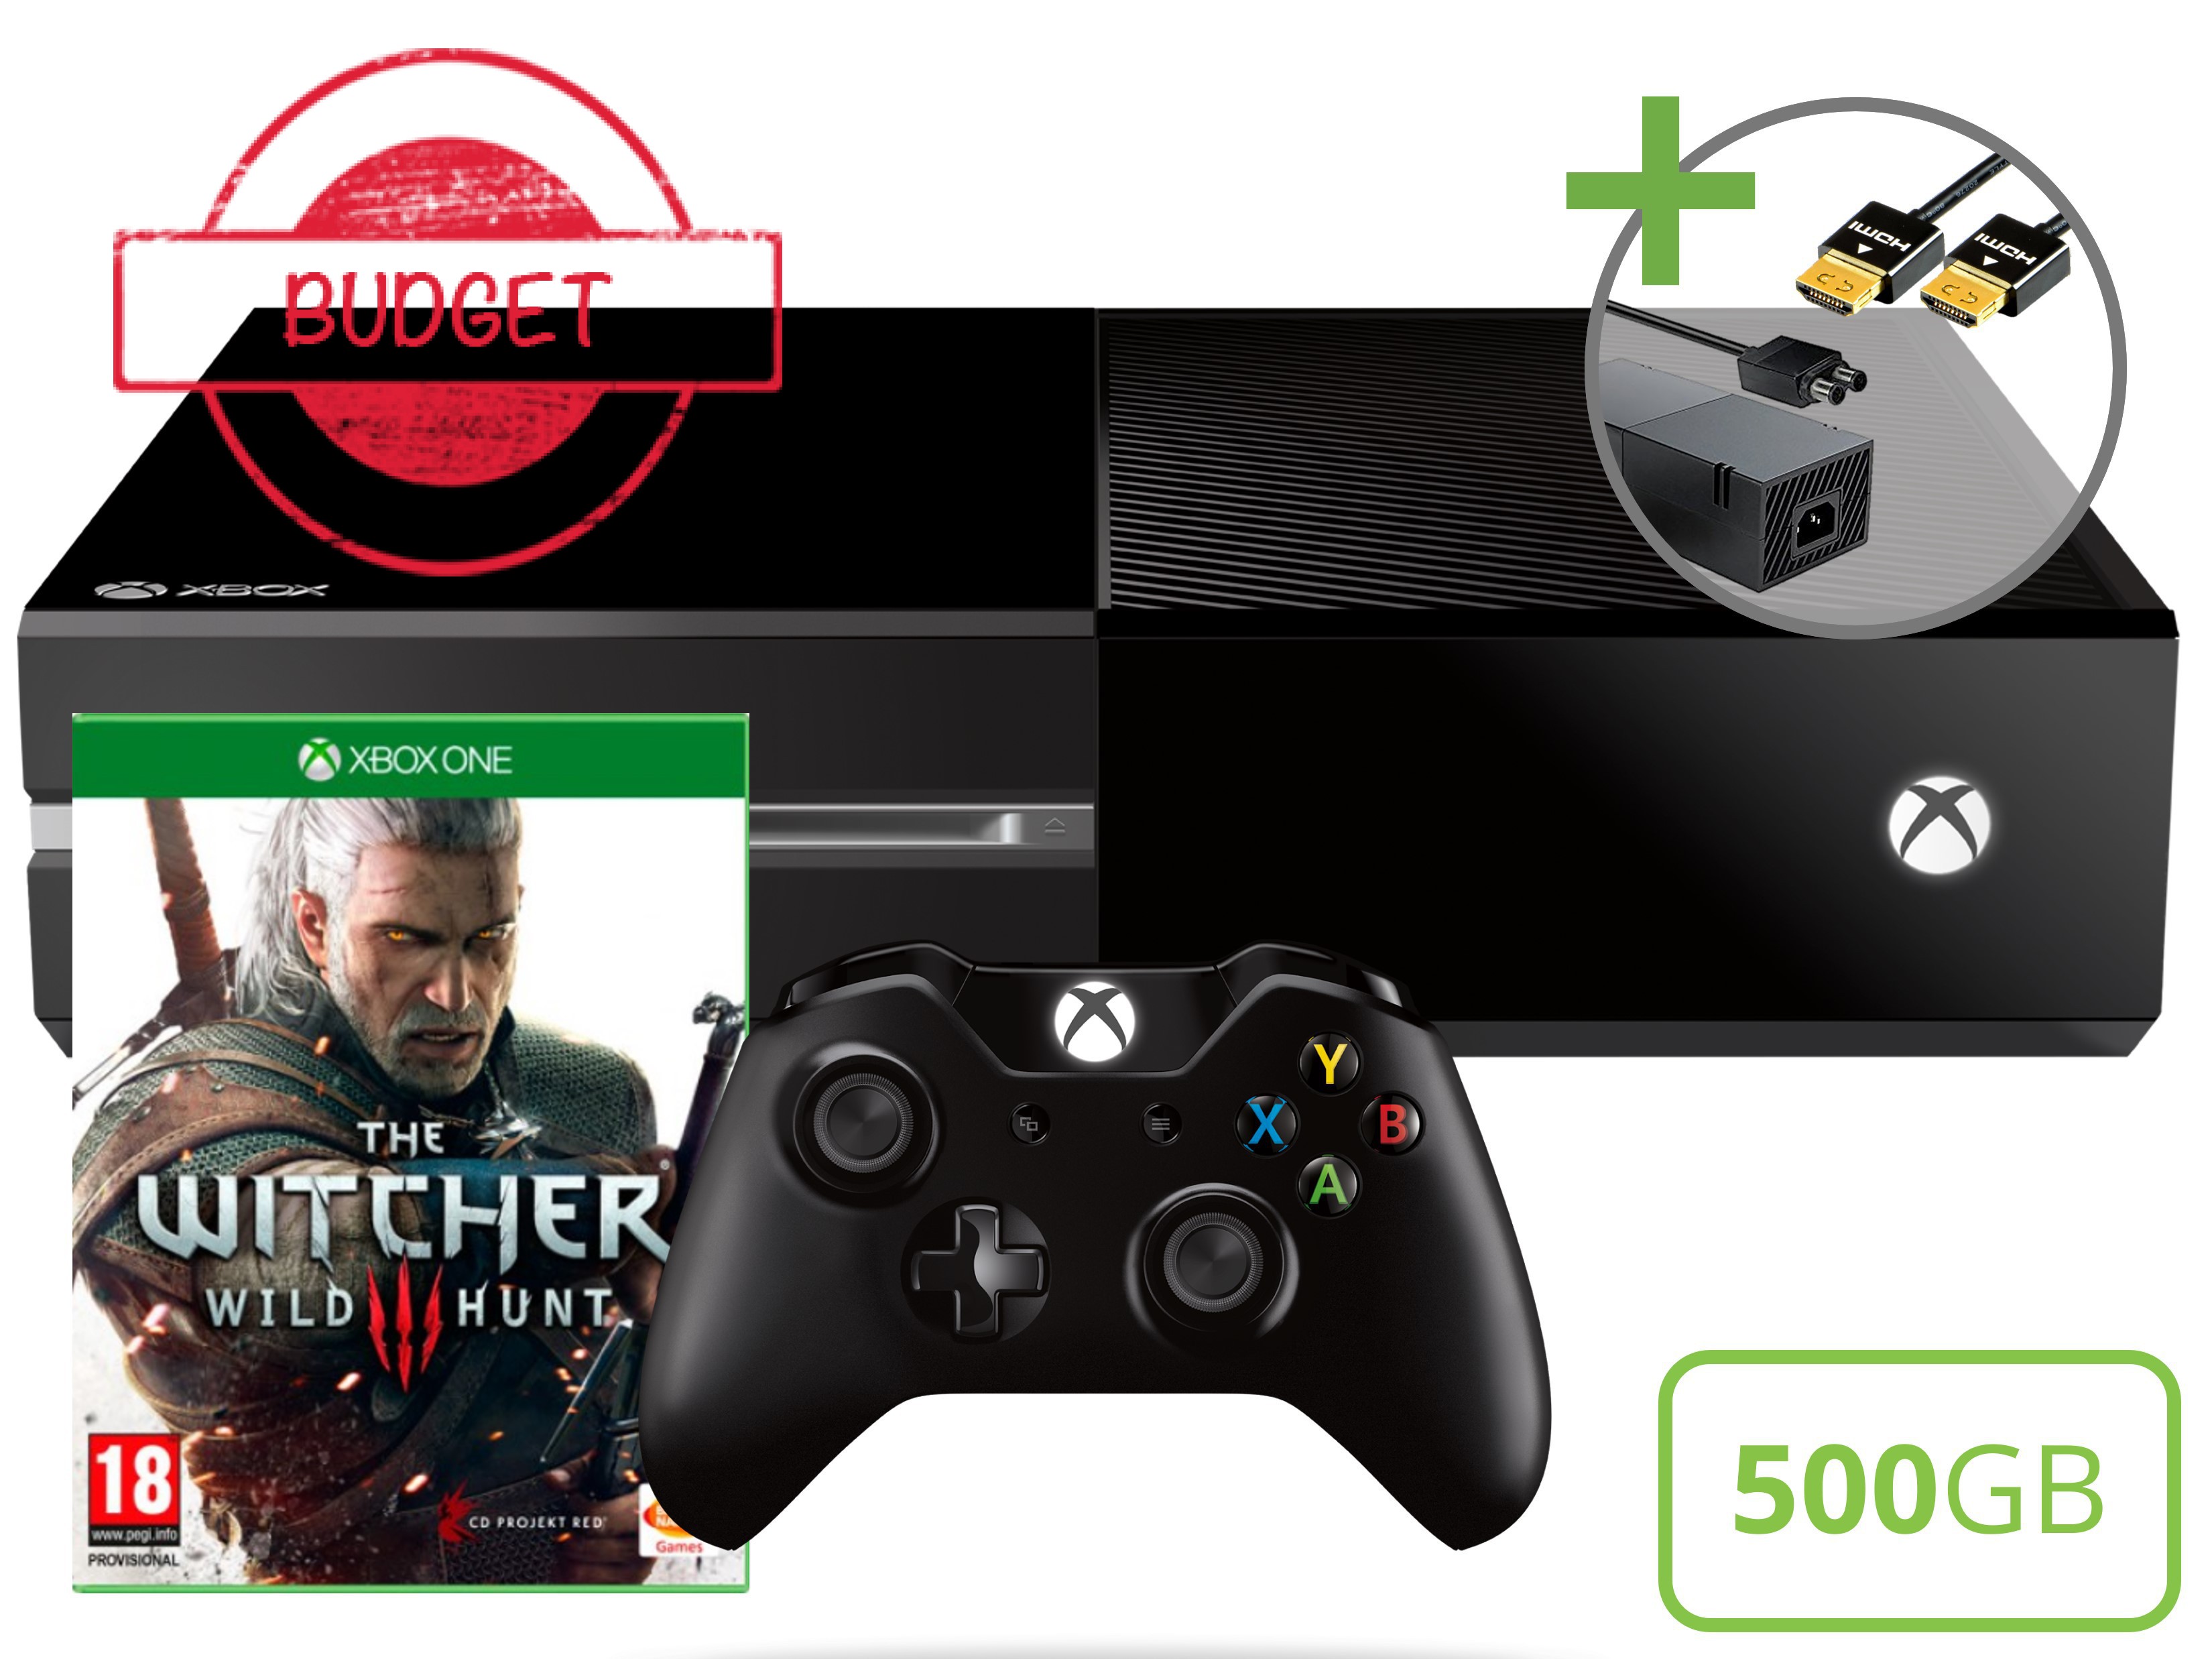 Microsoft Xbox One Starter Pack - 500GB The Witcher 3 Wild Hunt Edition - Budget - Xbox One Hardware